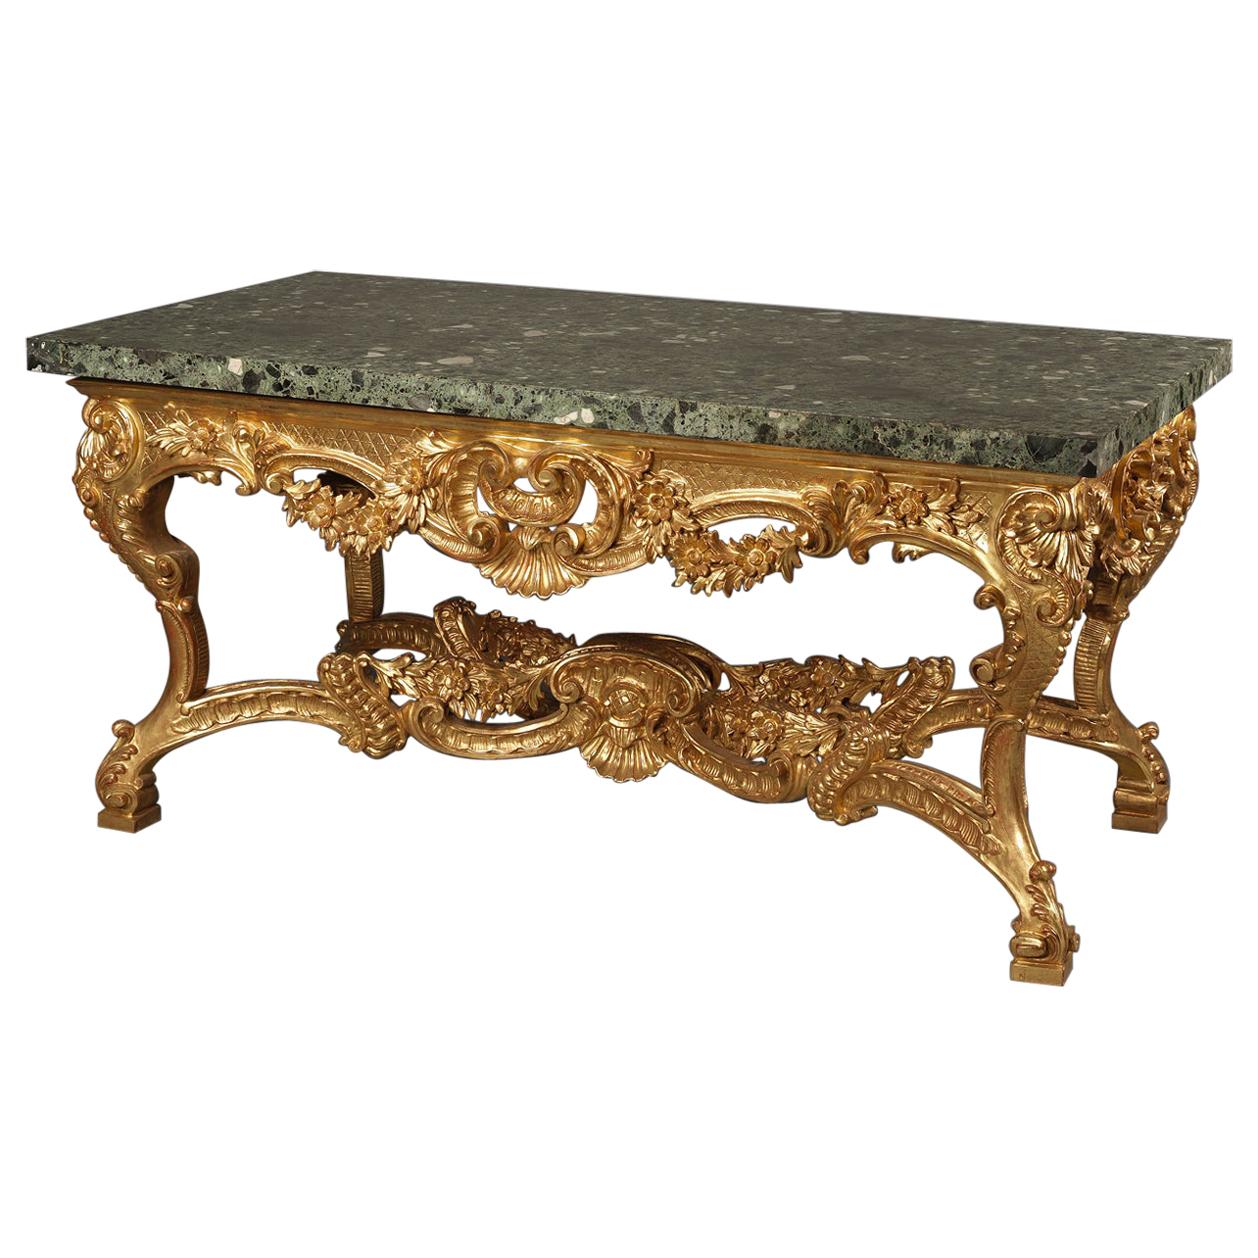 Italian Carved Giltwood Centre Table with a Verde Antico Marble Top, circa 1860 For Sale